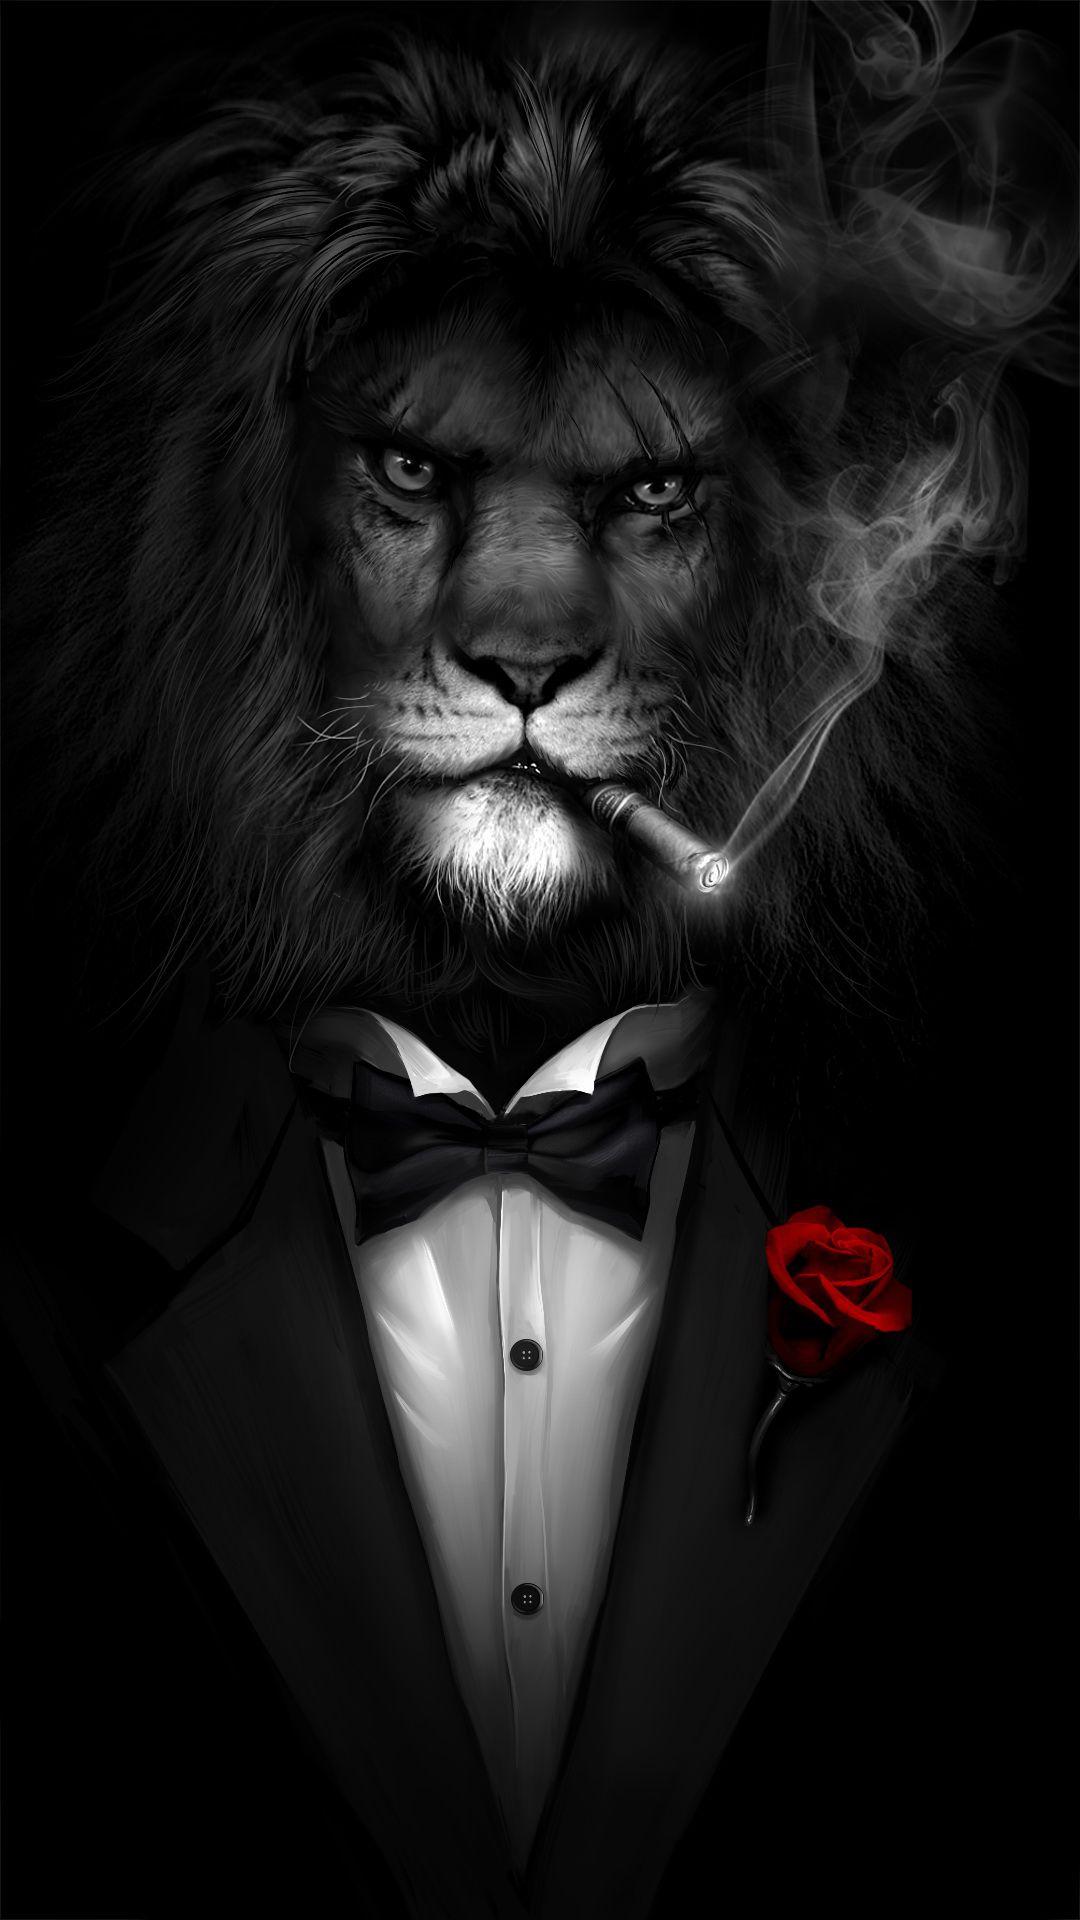 Lion in a black suit， very cool live wallpaper!